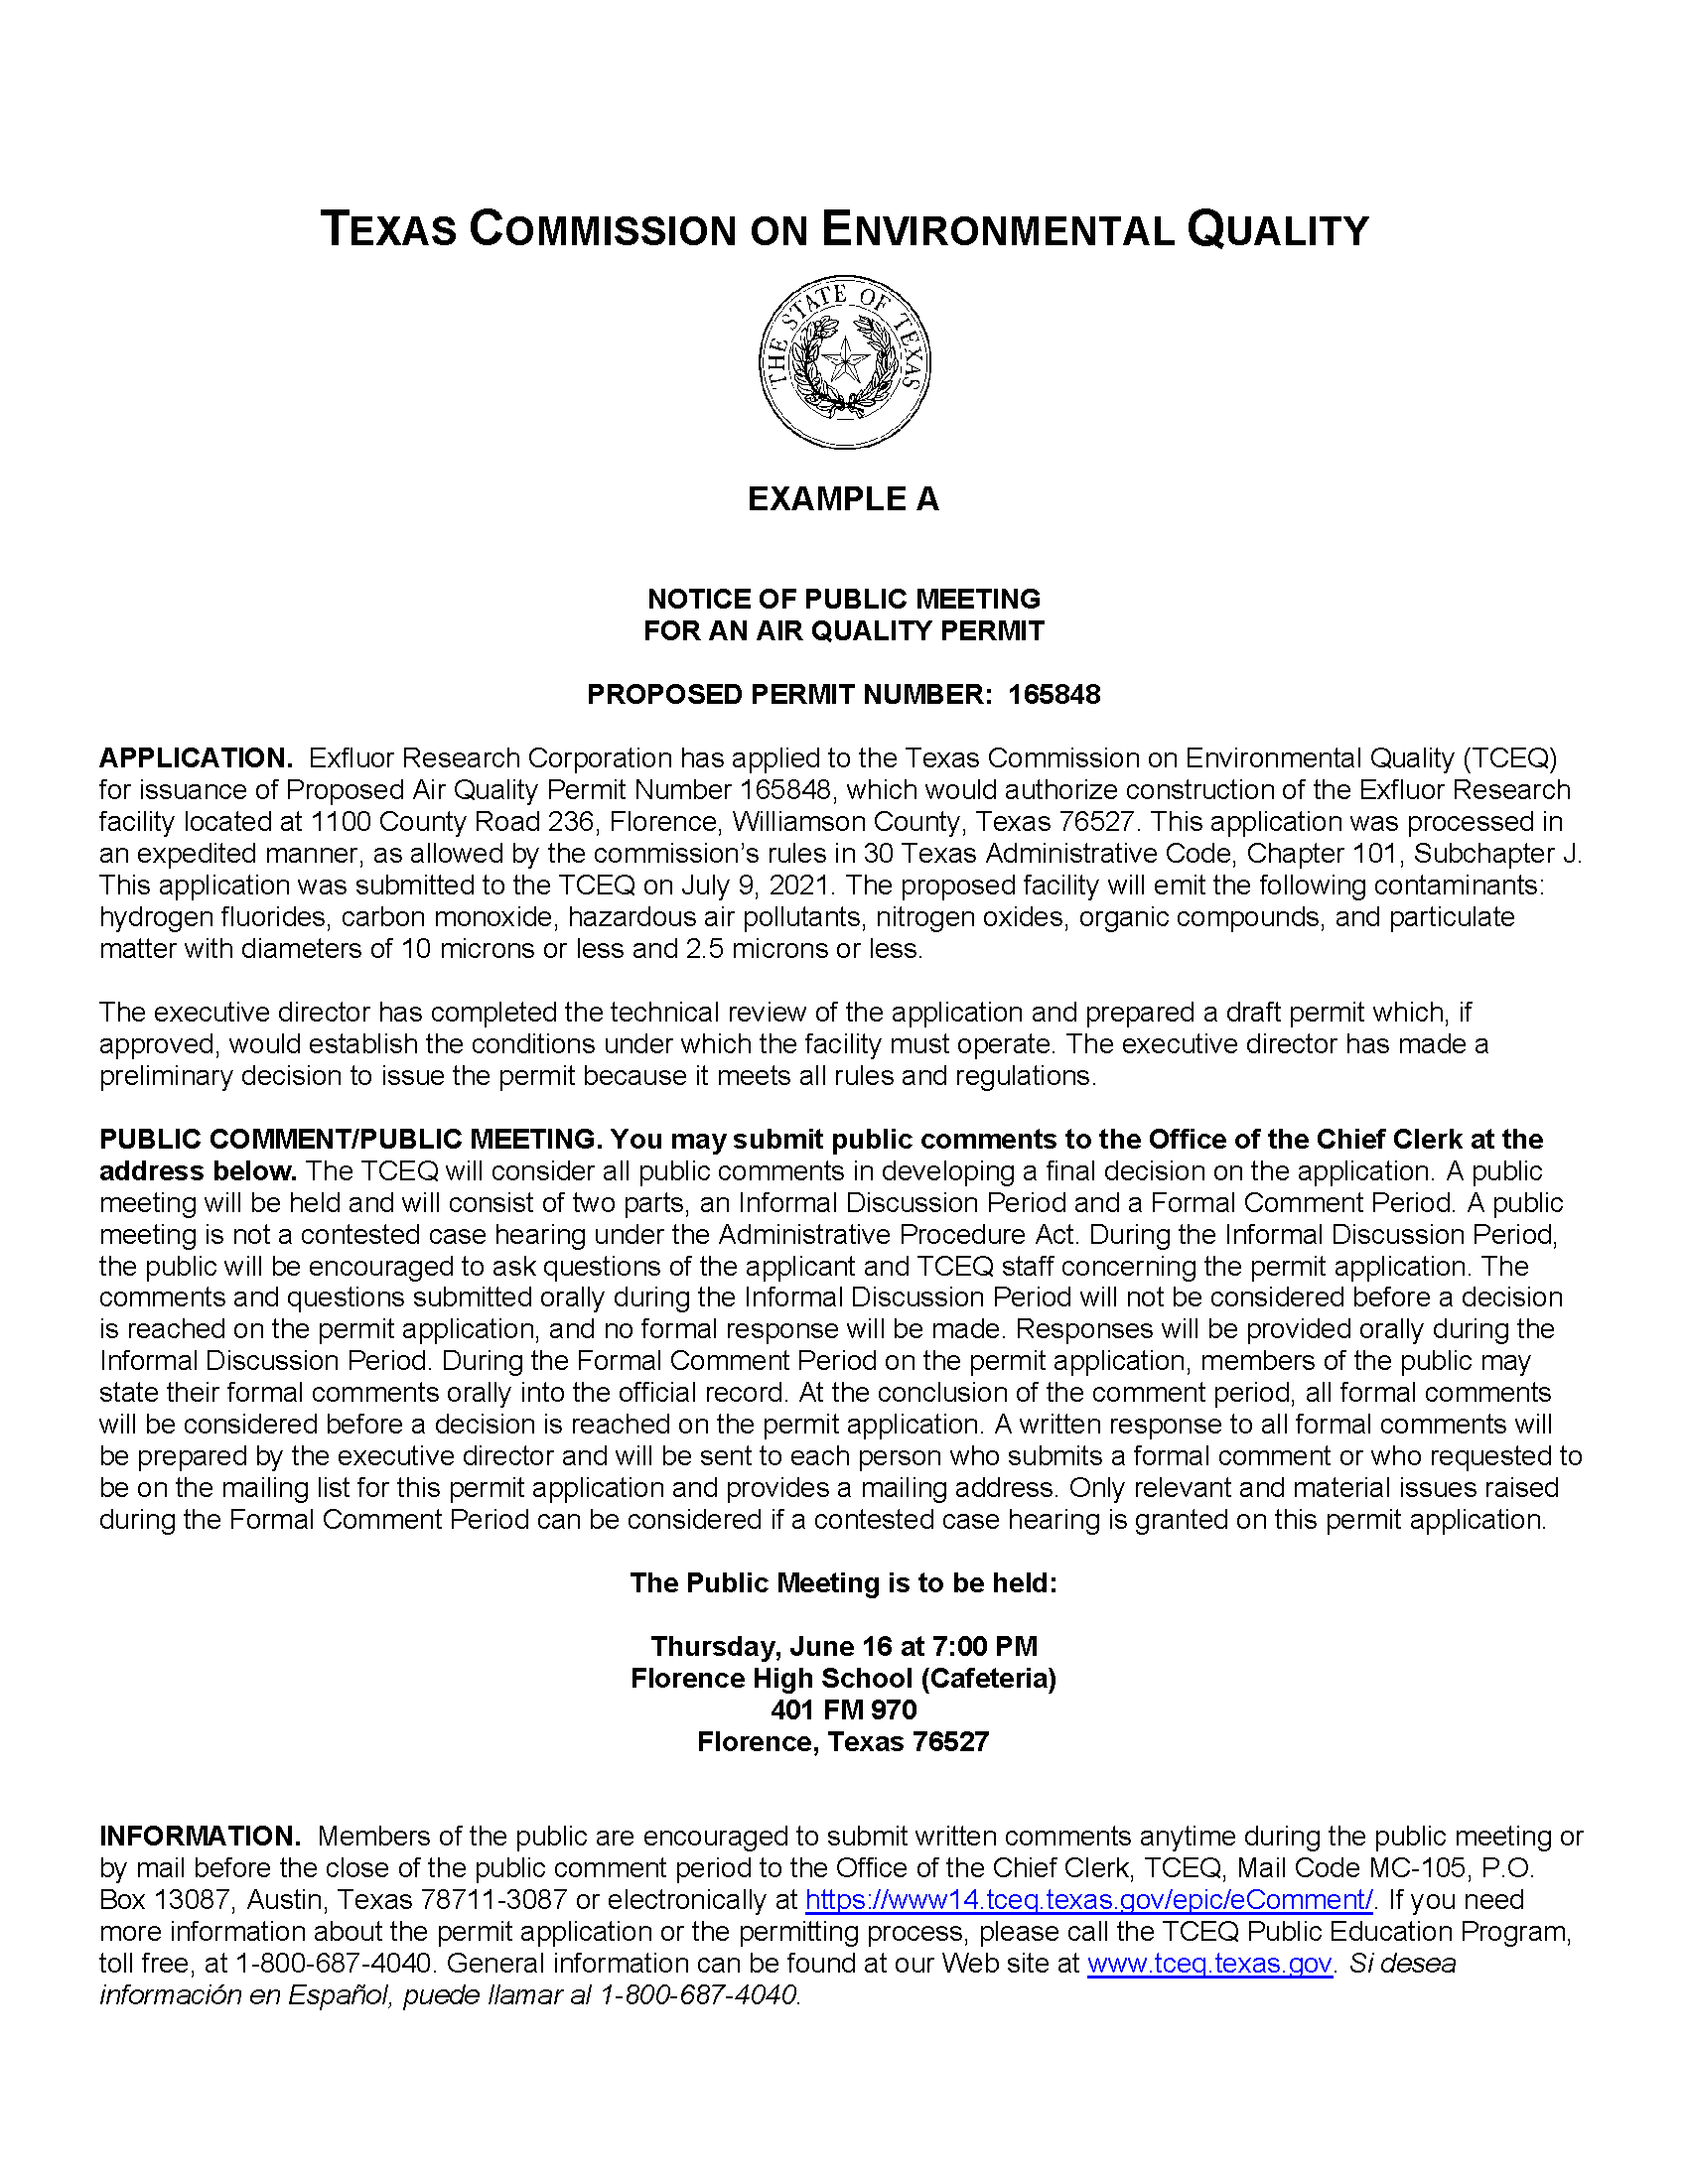 Full Public Notice from the TCEQ